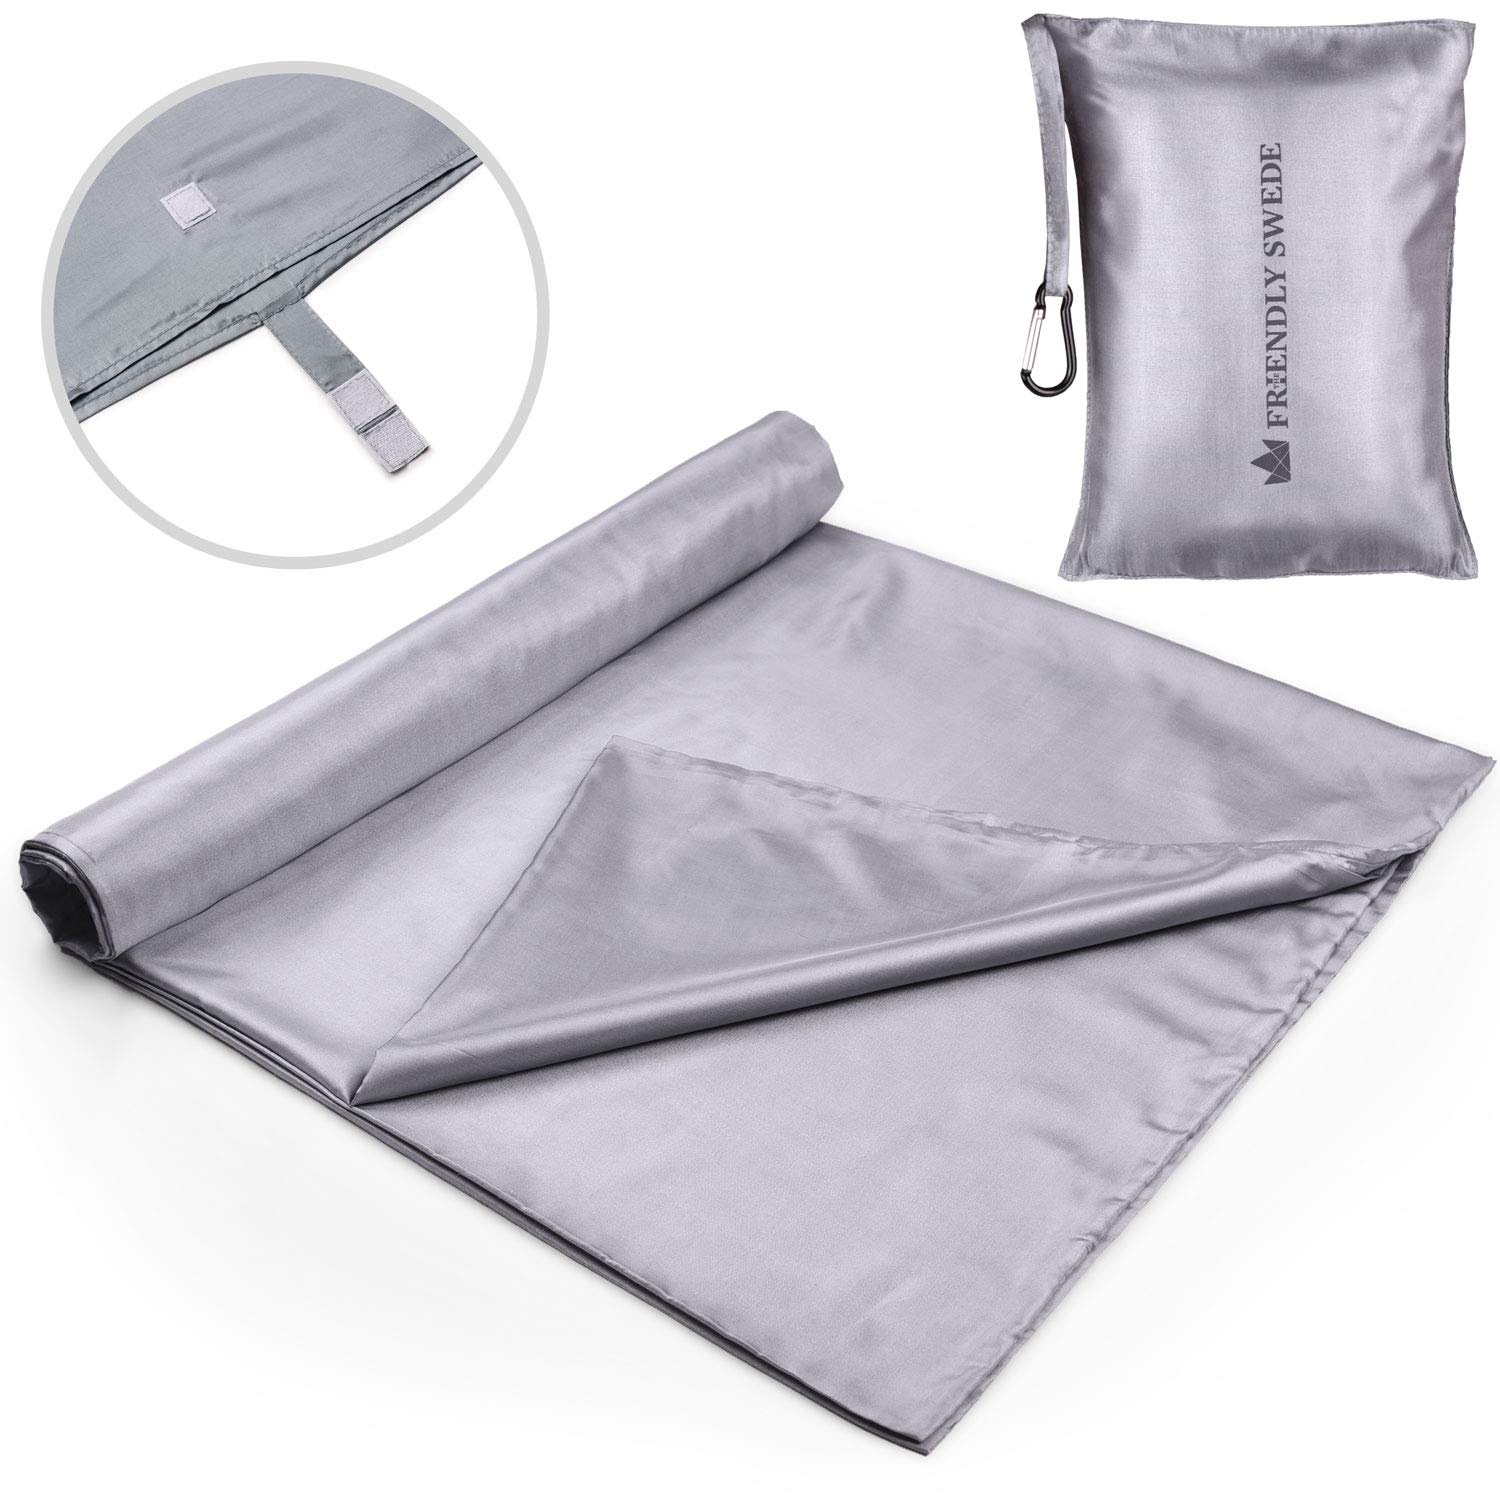 Olyfan Sleeping Bag Liner Sheet Lightweight Silk Soft Camping Travel Anti Bug Pillow Pocket Travel Pouch Traveling Camp Hotel Backpacking Prevent Dirty On Business Hotel 110 * 160 cm Random Color 